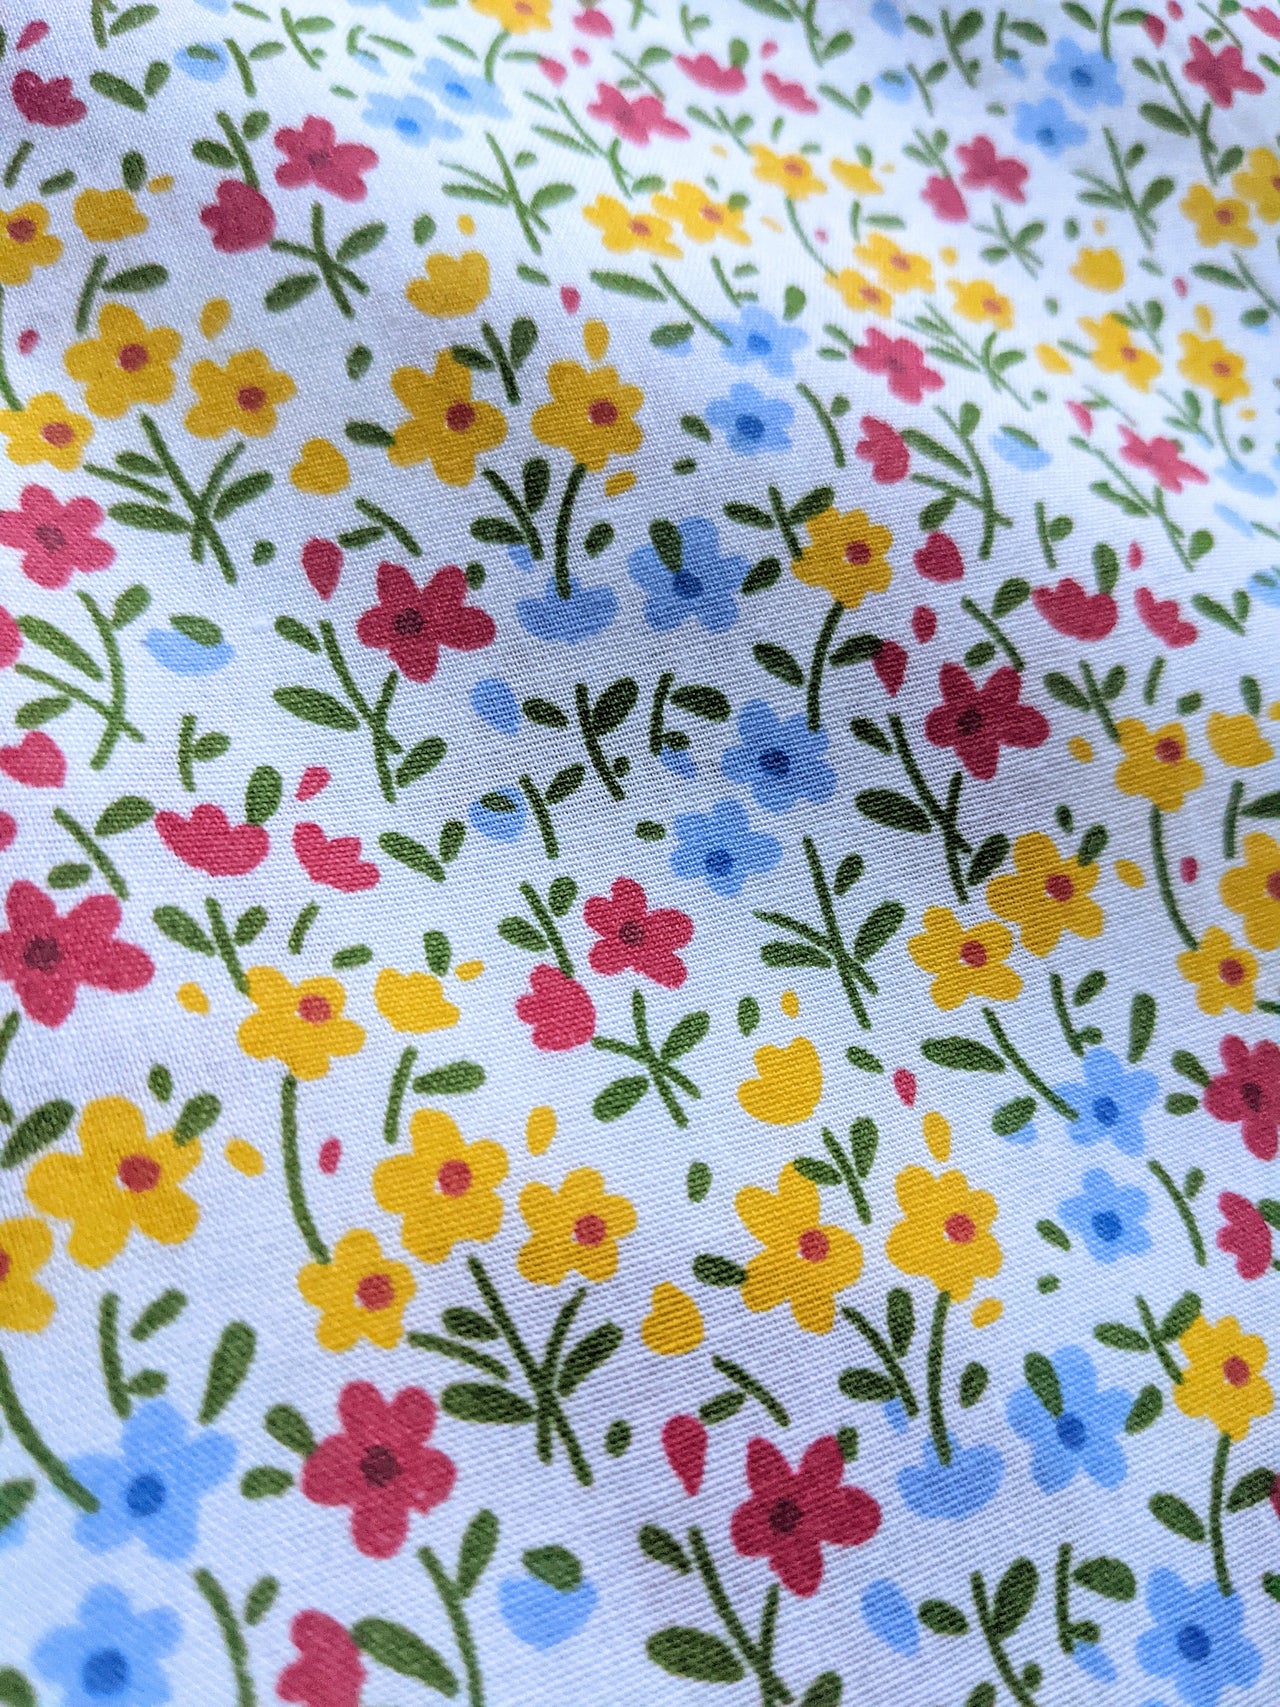 Yellow And Red Poly Cotton Flower Garden Fabric, Floral Fabric, Small Print Fabric Small Flower Fabric Fabric Quilting Fabric